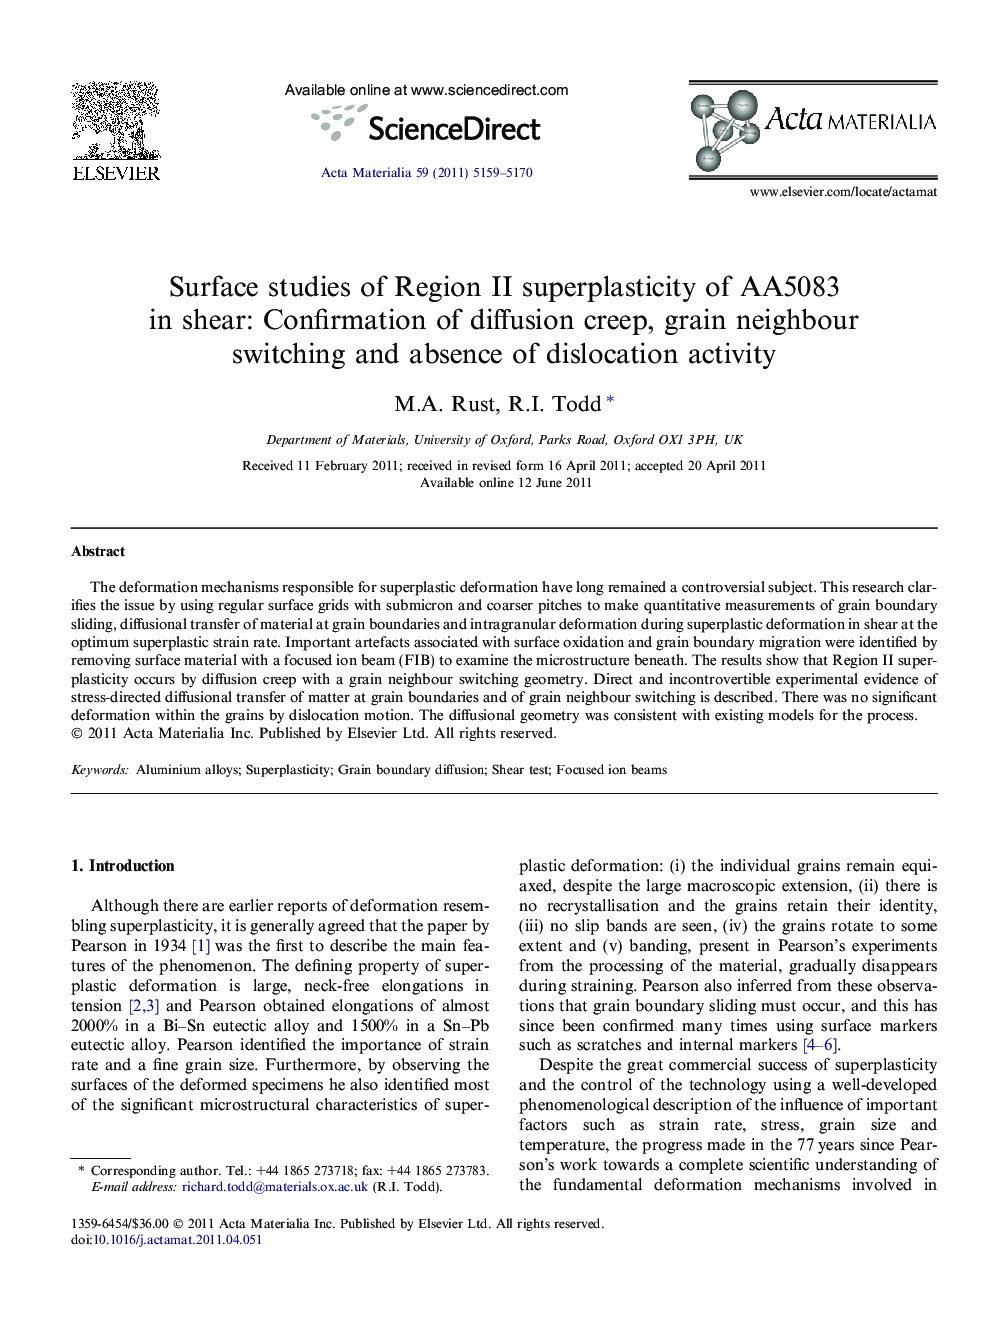 Surface studies of Region II superplasticity of AA5083 in shear: Confirmation of diffusion creep, grain neighbour switching and absence of dislocation activity